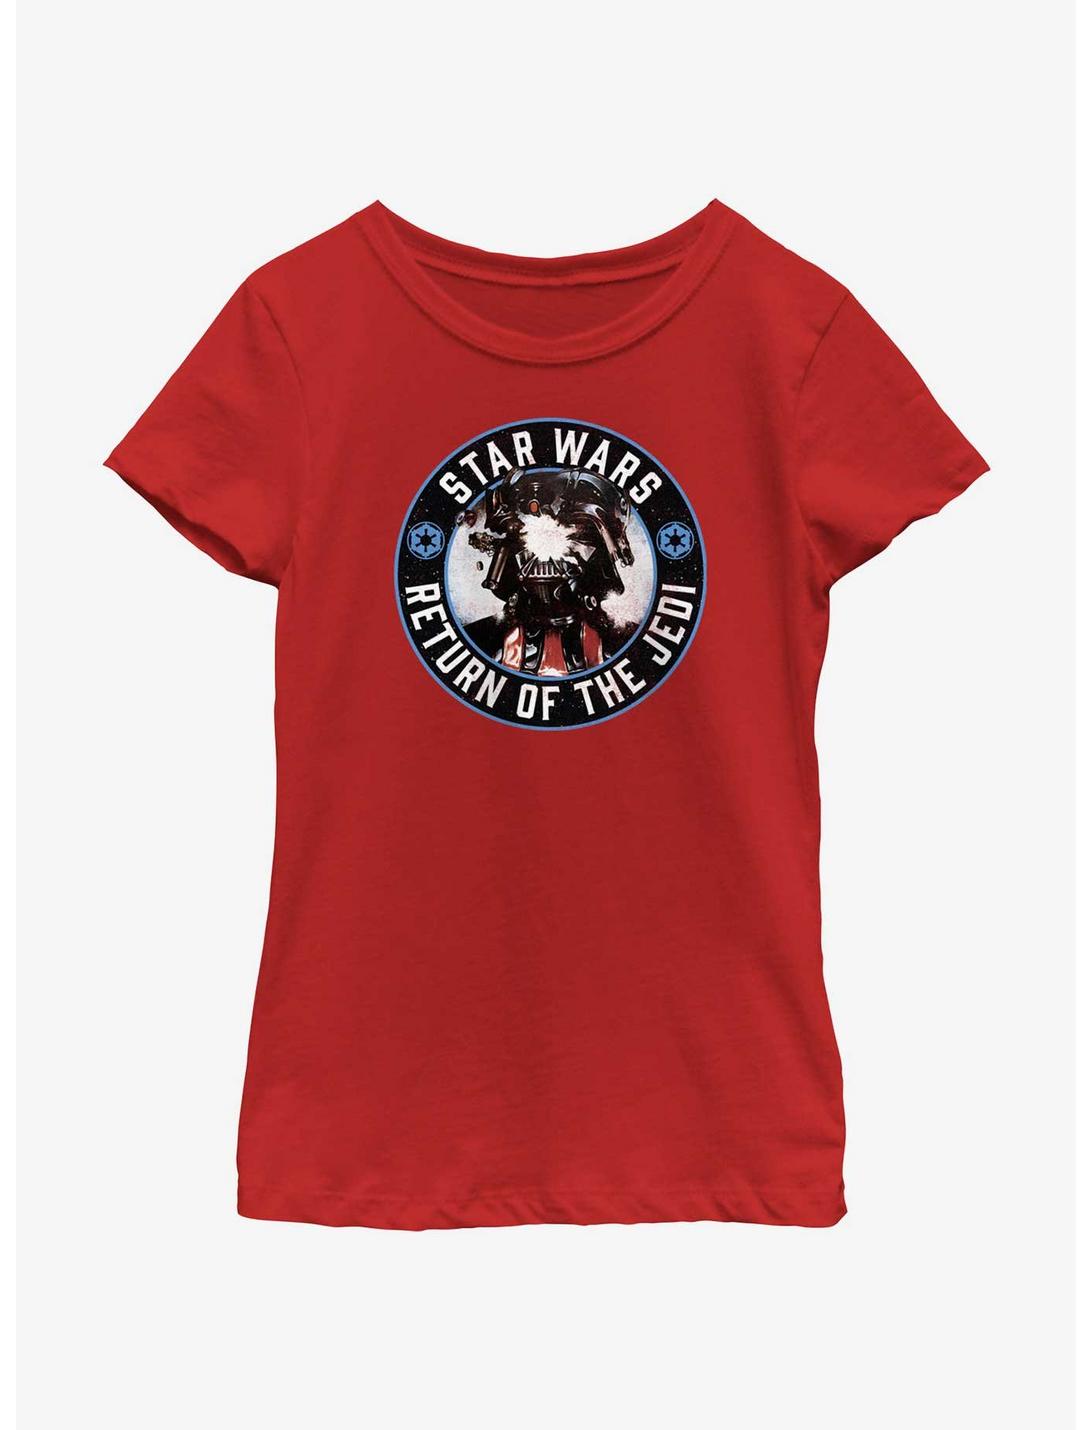 Star Wars Return Of The Jedi Vader Icon Youth Girls T-Shirt, RED, hi-res